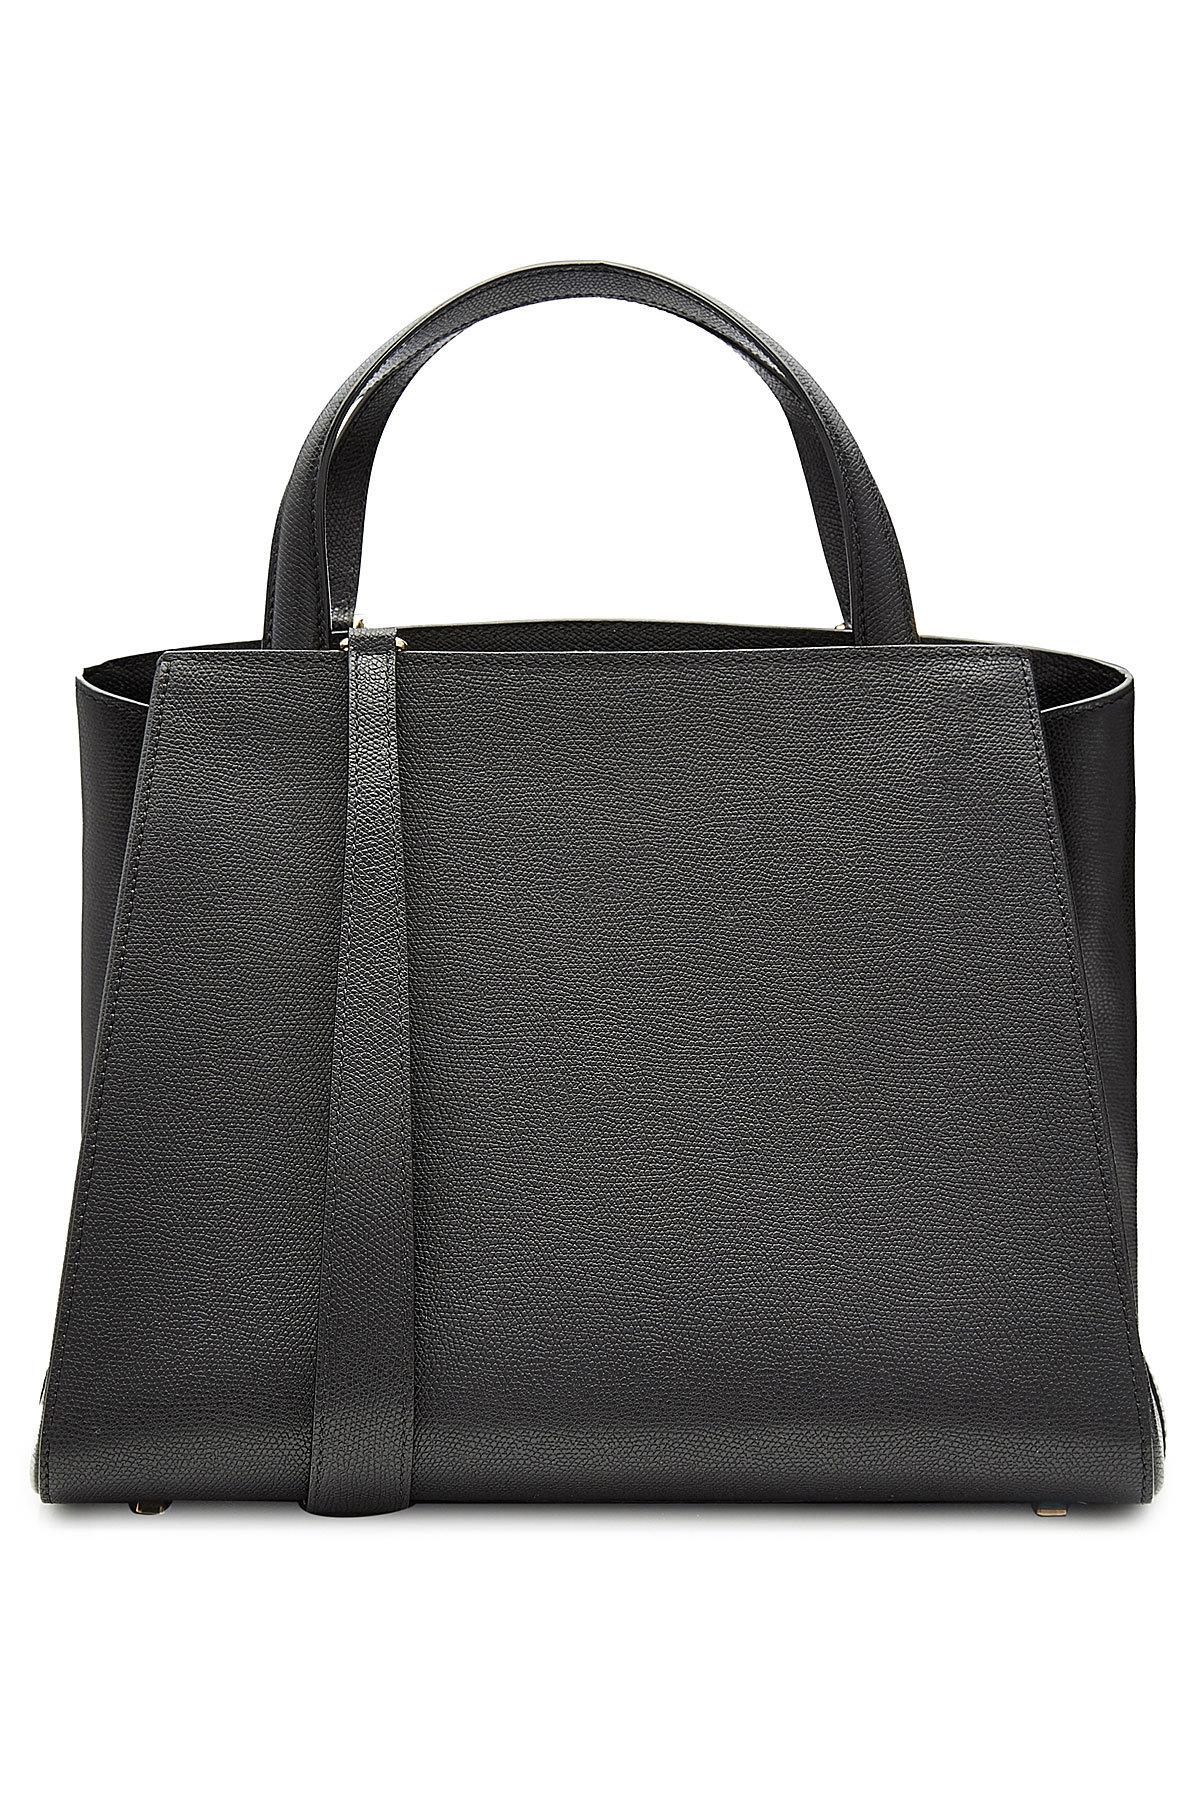 Valextra Leather Tote Bag - Lyst